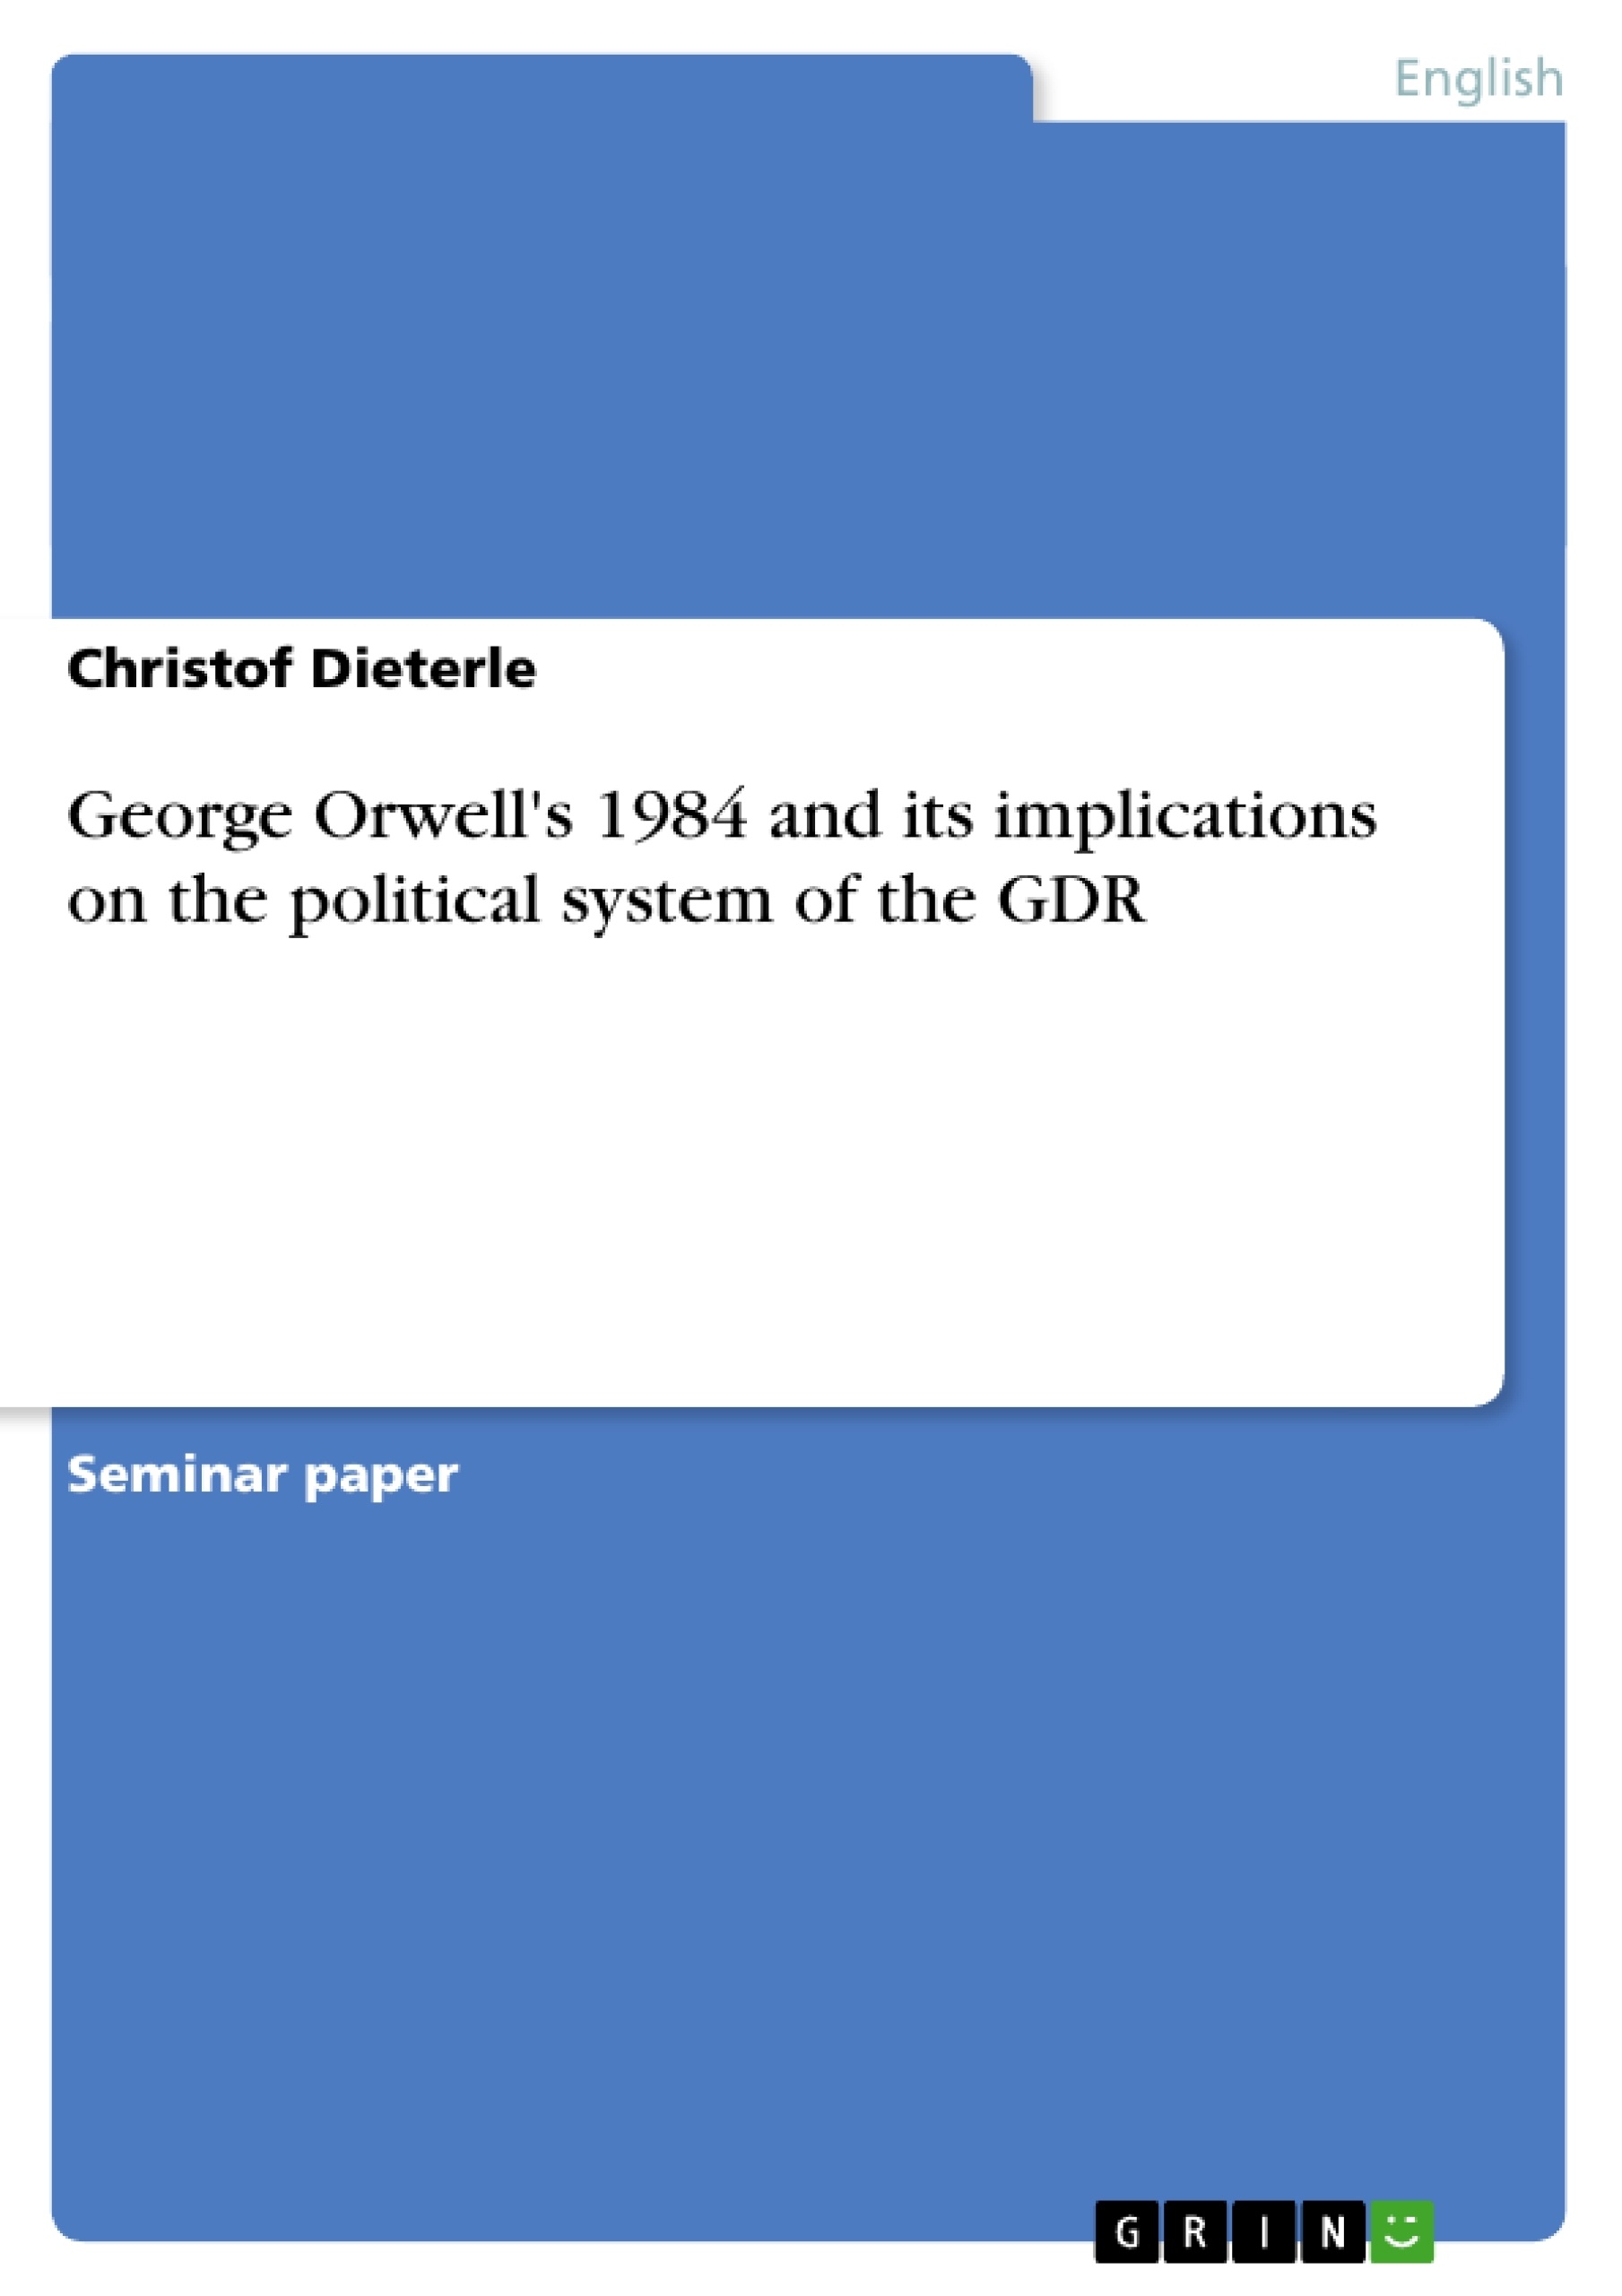 Title: George Orwell's 1984 and its implications on the political system of the GDR